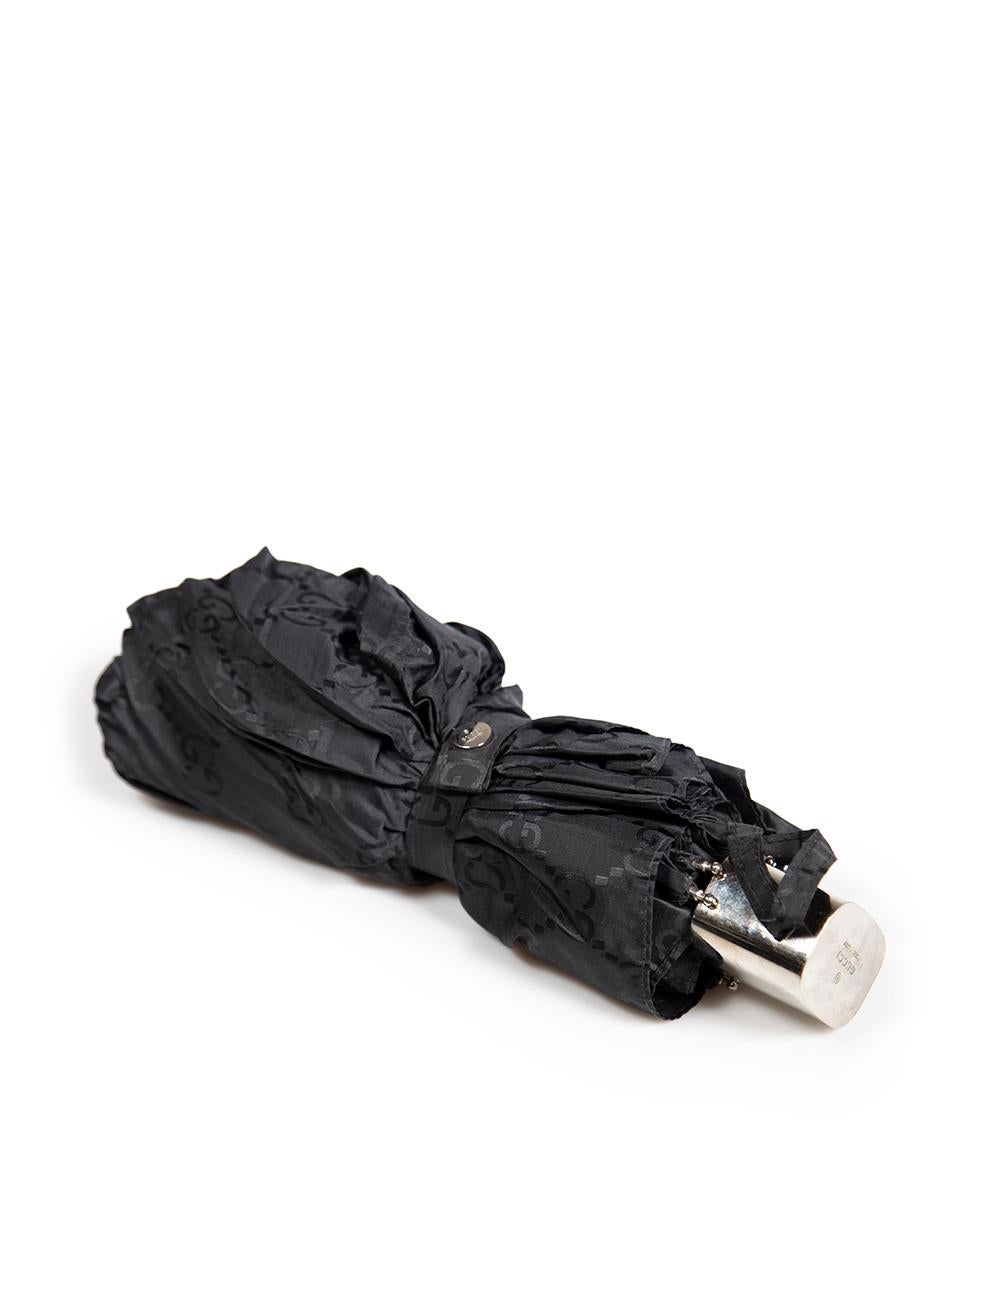 CONDITION is Very good. Minimal wear to umbrella is evident. Minimal wear to the umbrella base with scratches and indents to the metal, the cover also has a small hole on this used Gucci designer resale item.
 
 
 
 Details
 
 
 Black
 
 Cloth
 
